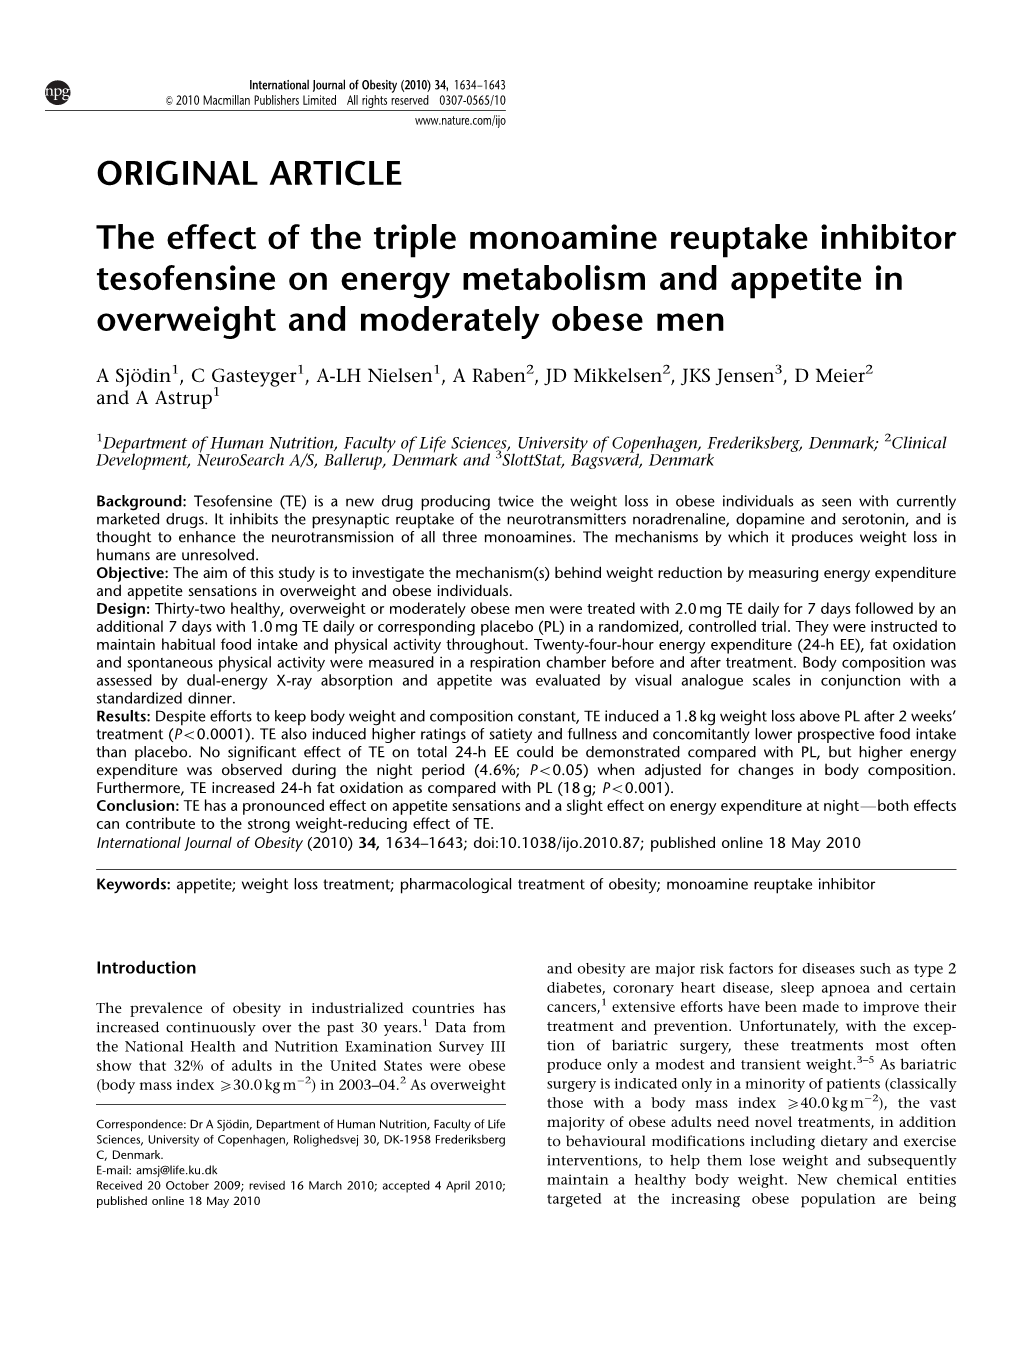 The Effect of the Triple Monoamine Reuptake Inhibitor Tesofensine on Energy Metabolism and Appetite in Overweight and Moderately Obese Men